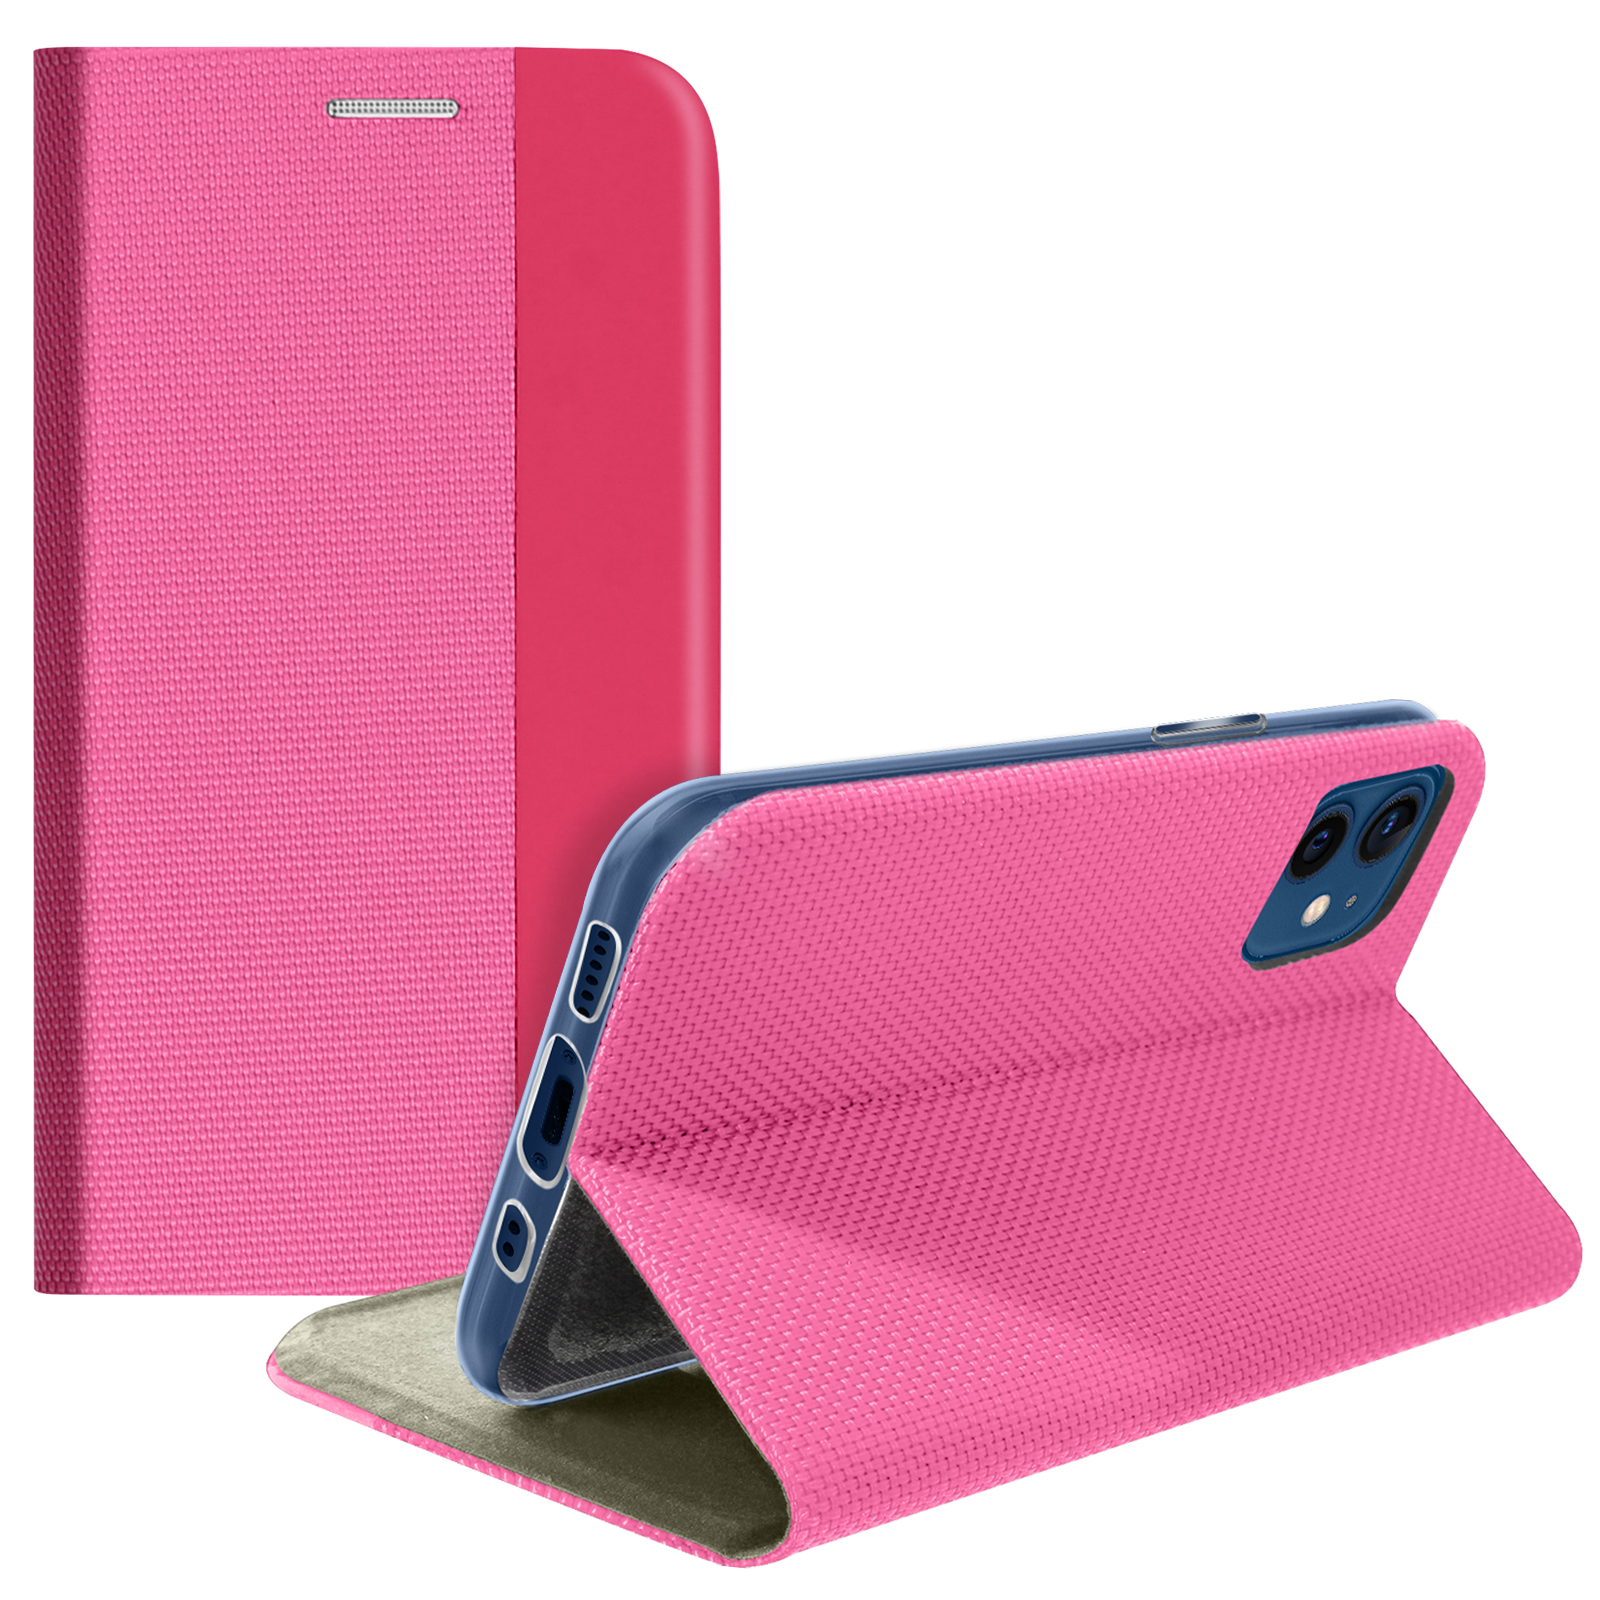 Touch Bookcover, Series, Mini, Rosa Soft Apple, AVIZAR 12 iPhone